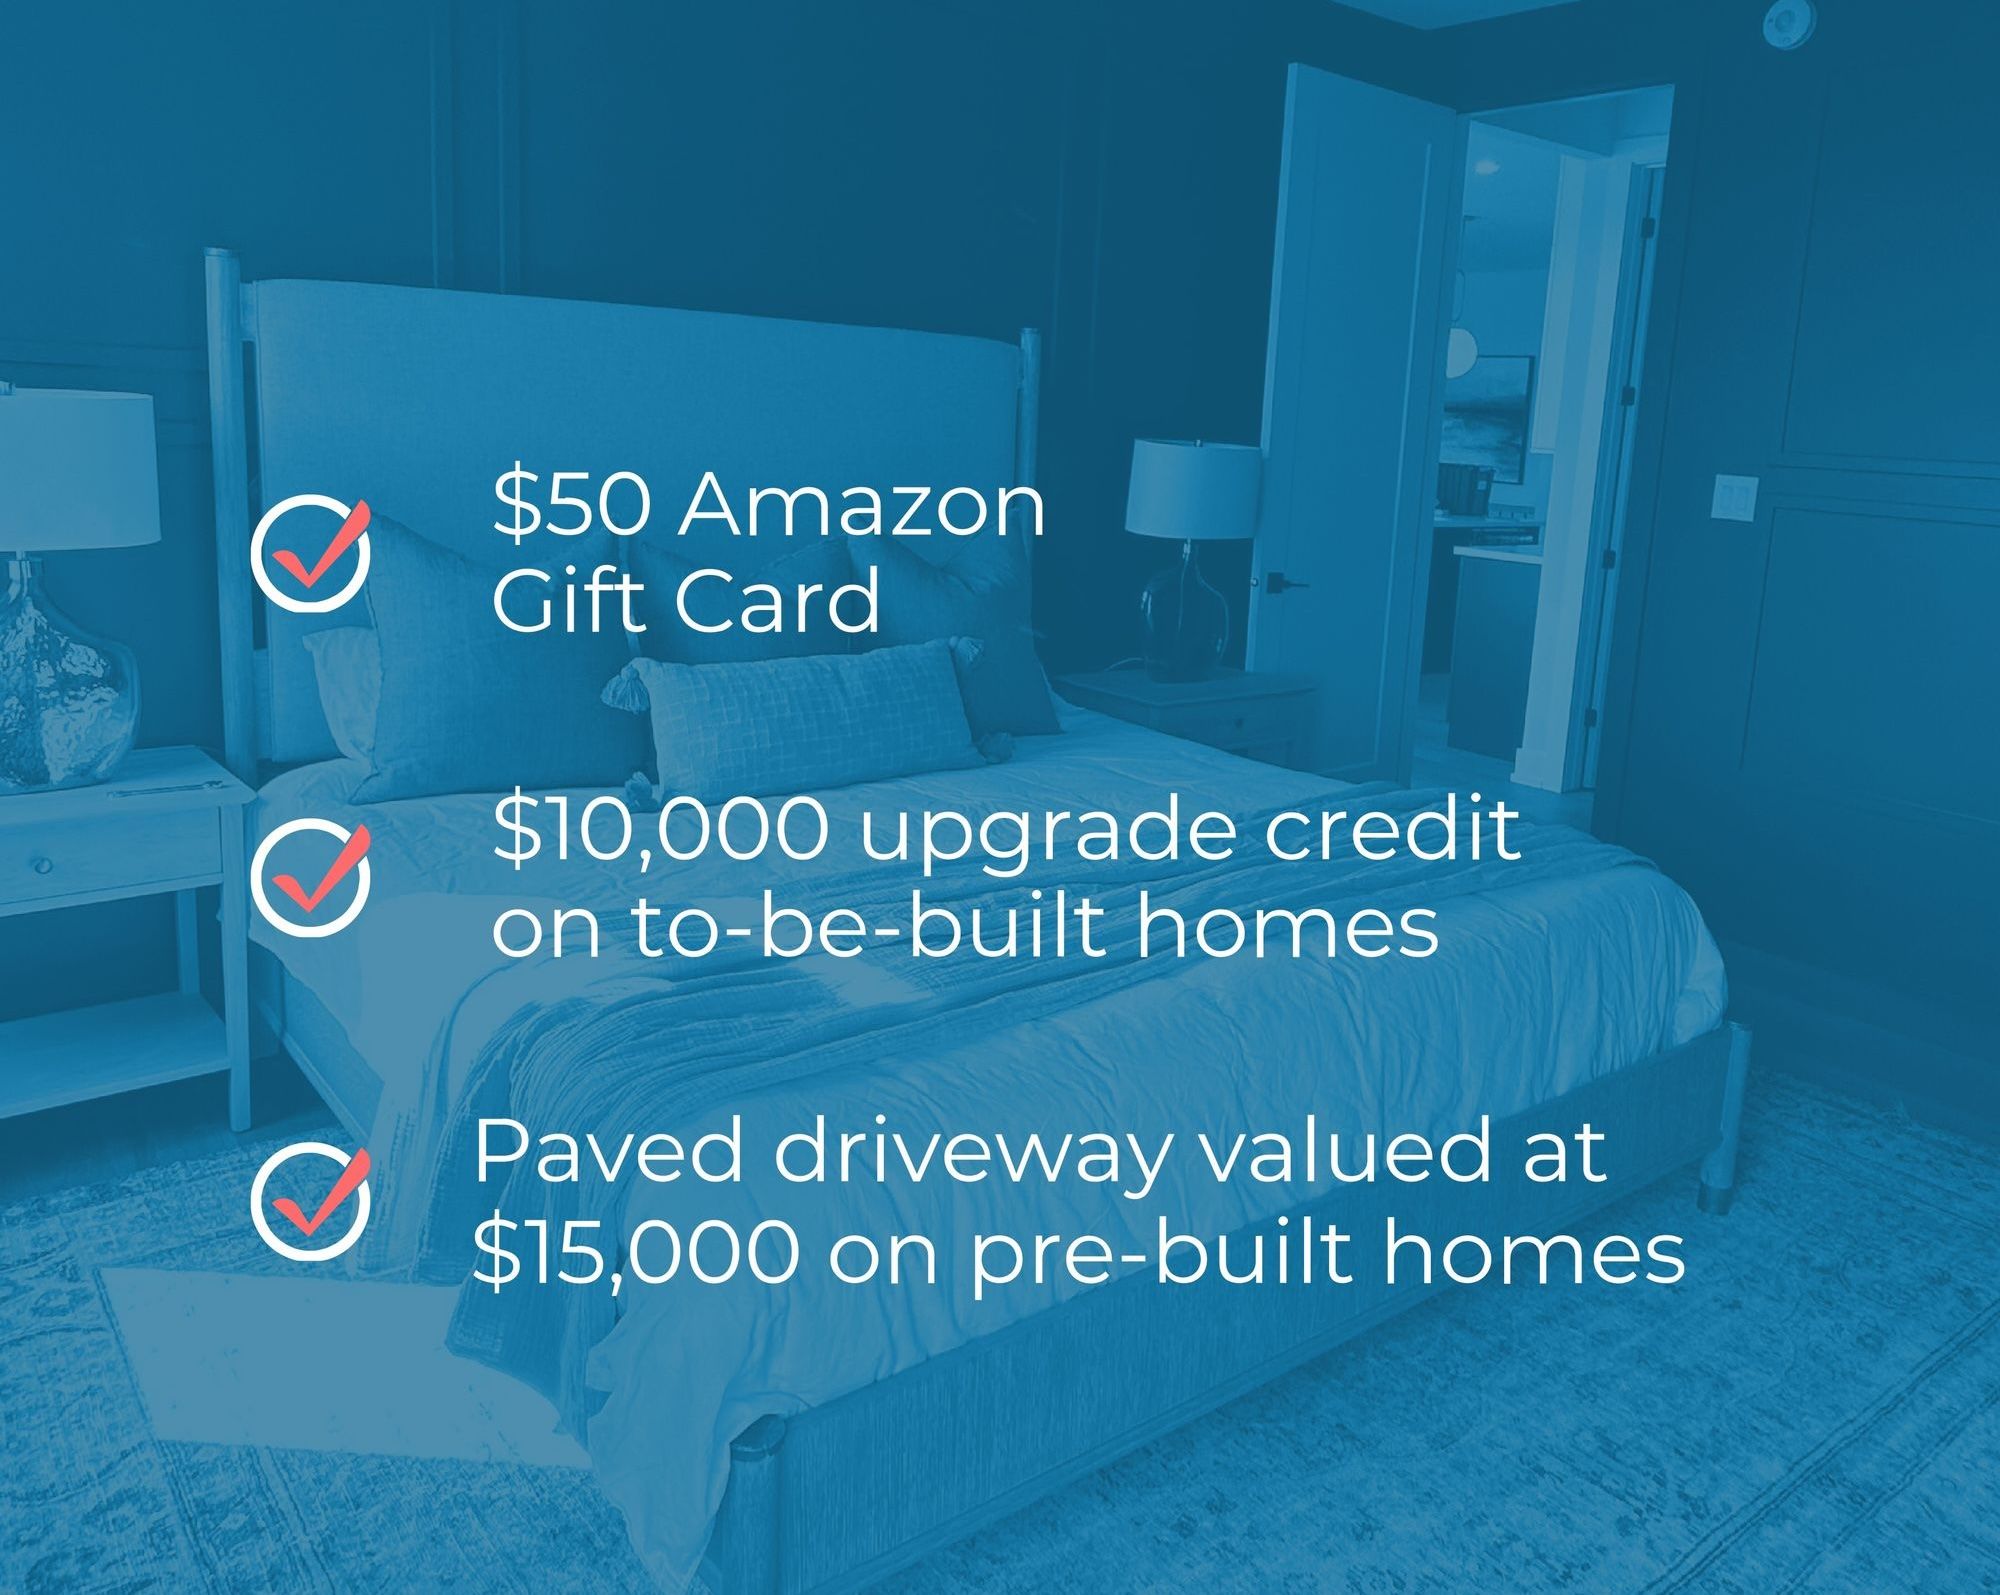 🎊Don't Miss Our Open House Today! get a $50 Amazon card,  $15k in incentives🌳